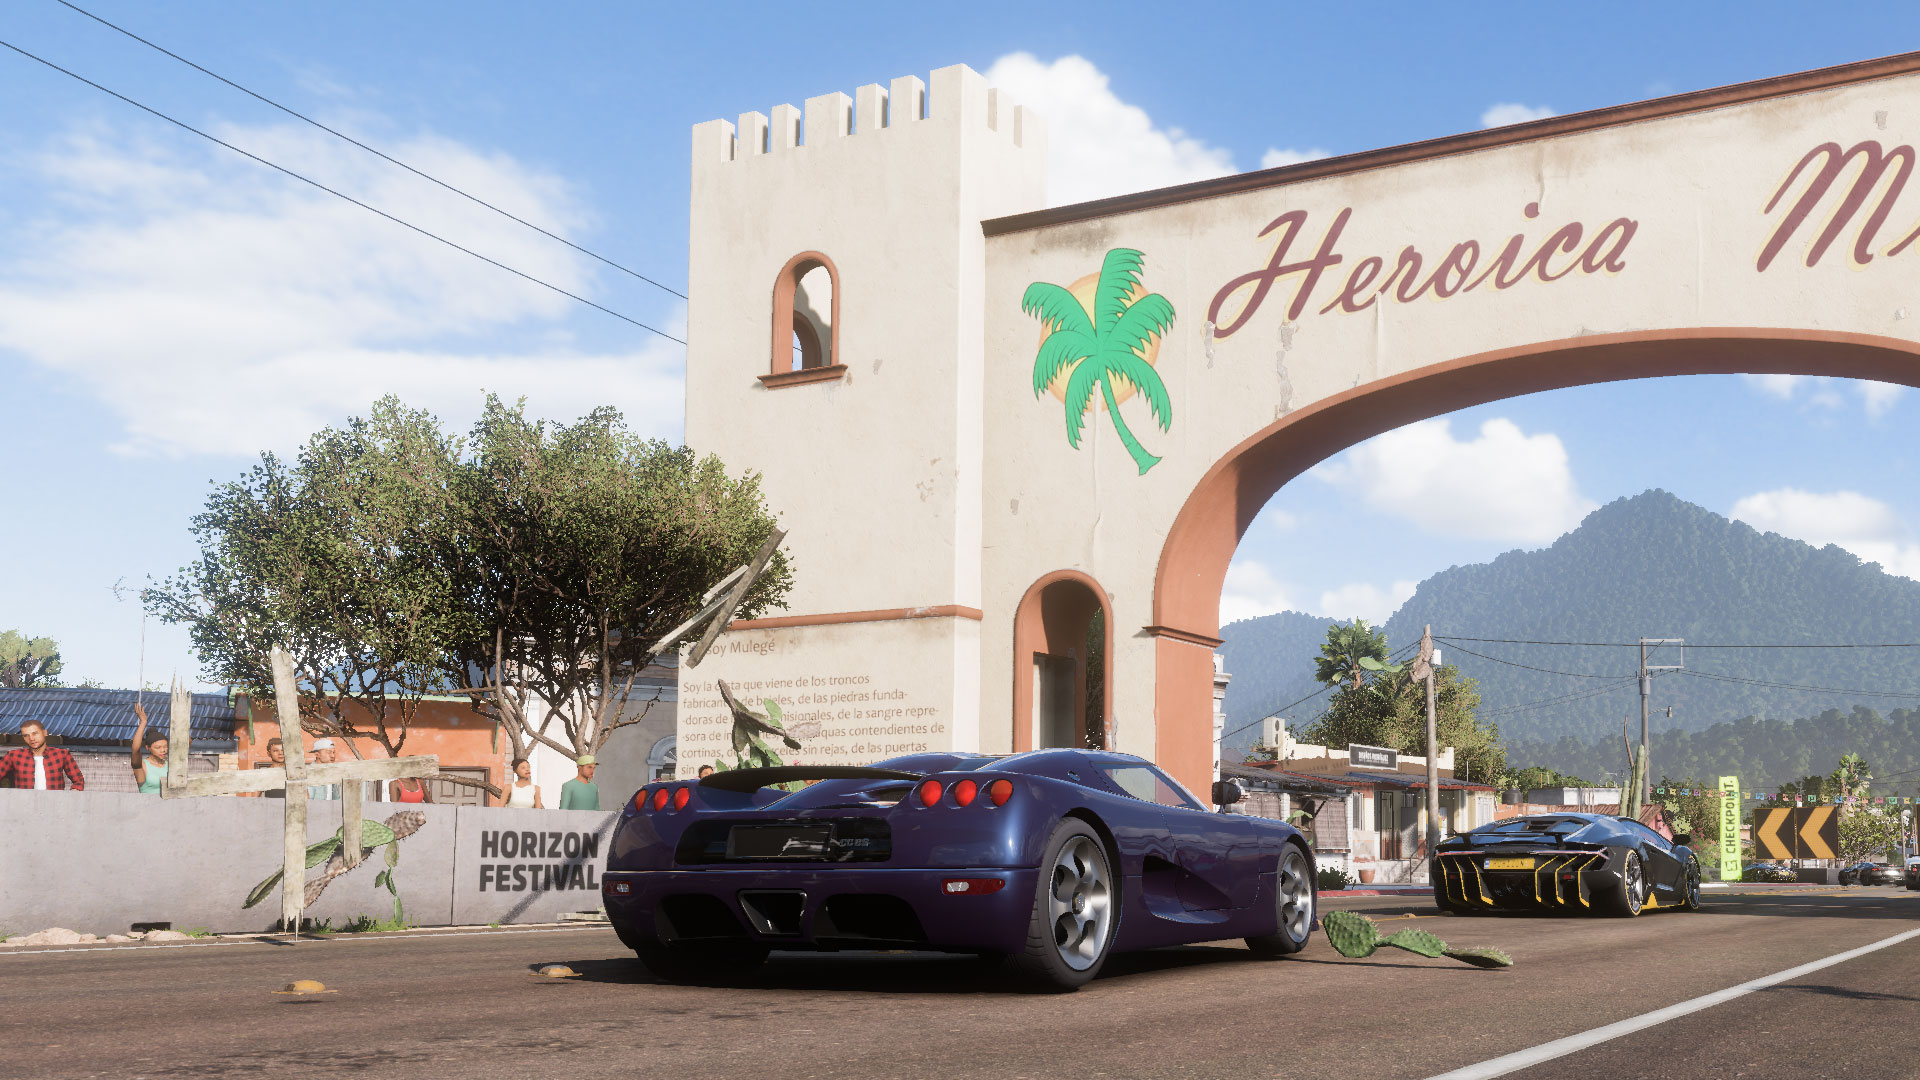 7 best graphics cards for Forza Horizon 5 (2022)